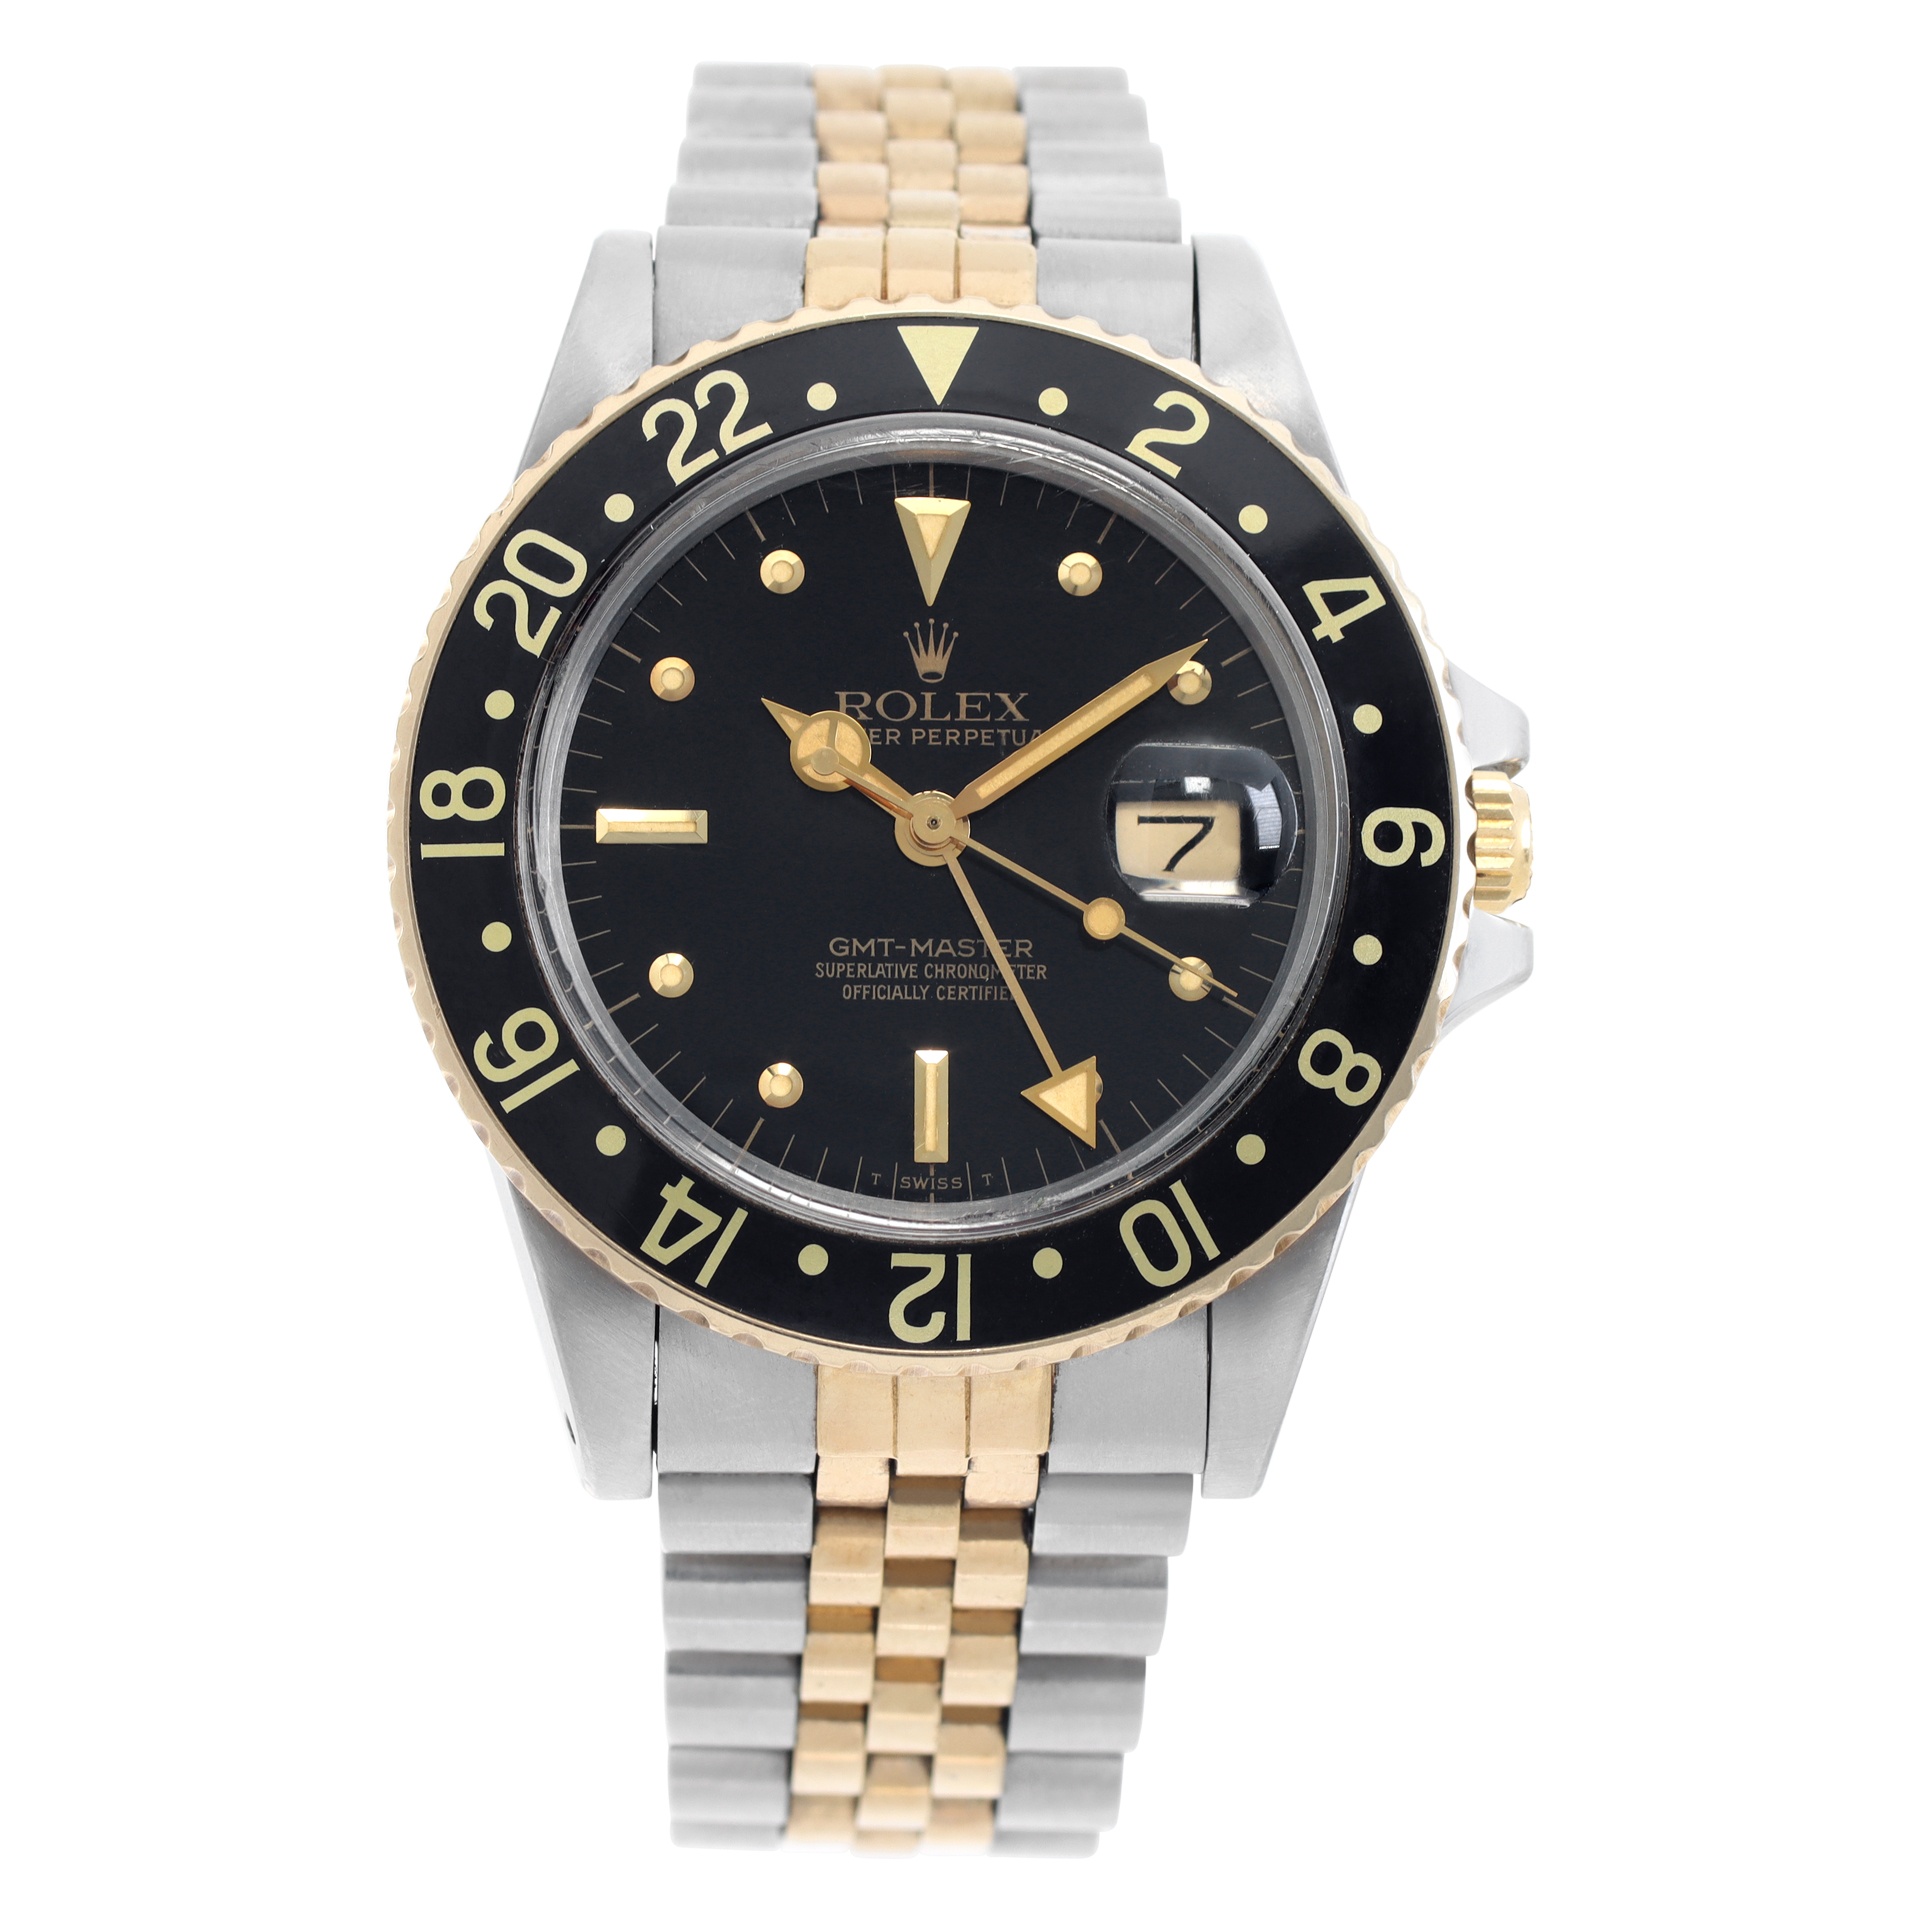 Rolex GMT-Master 40mm 16753 (Watches)Back Reset Delete Duplicate Save Save and Continue Edit